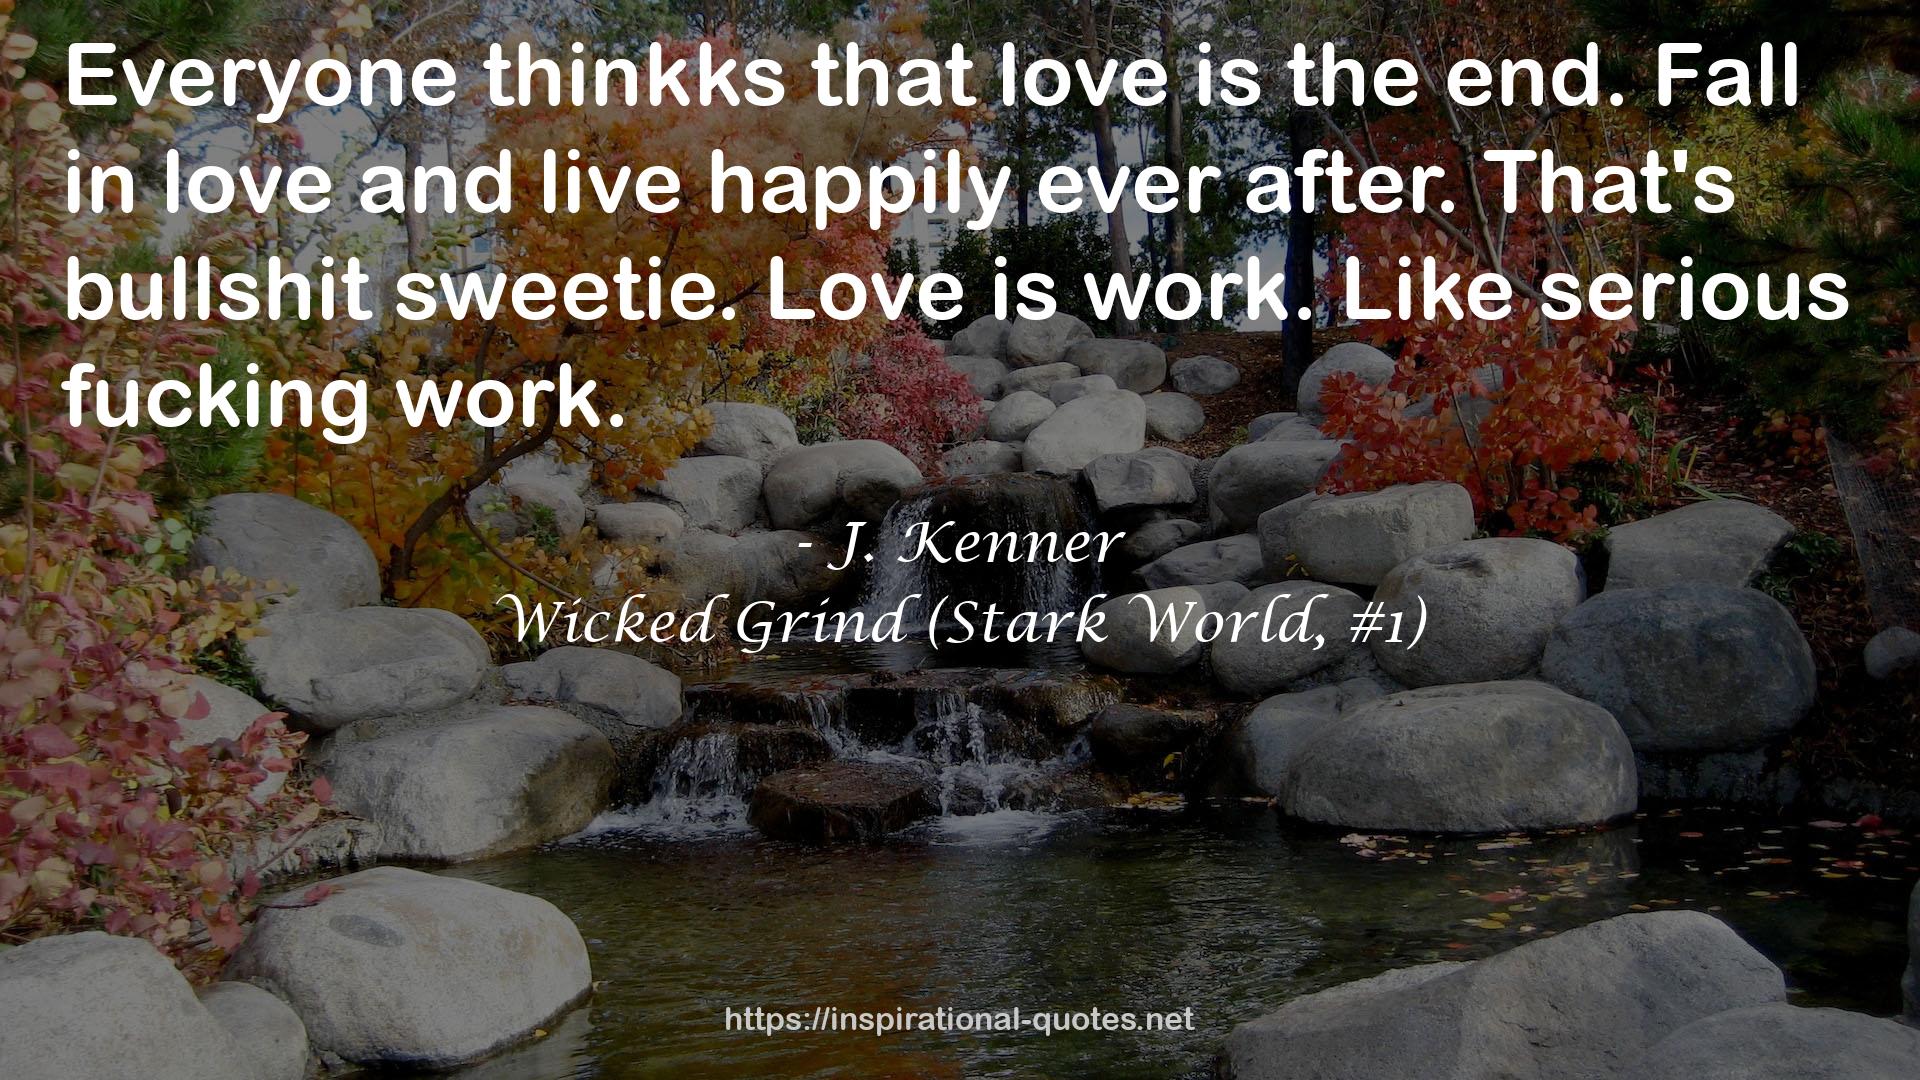 Wicked Grind (Stark World, #1) QUOTES